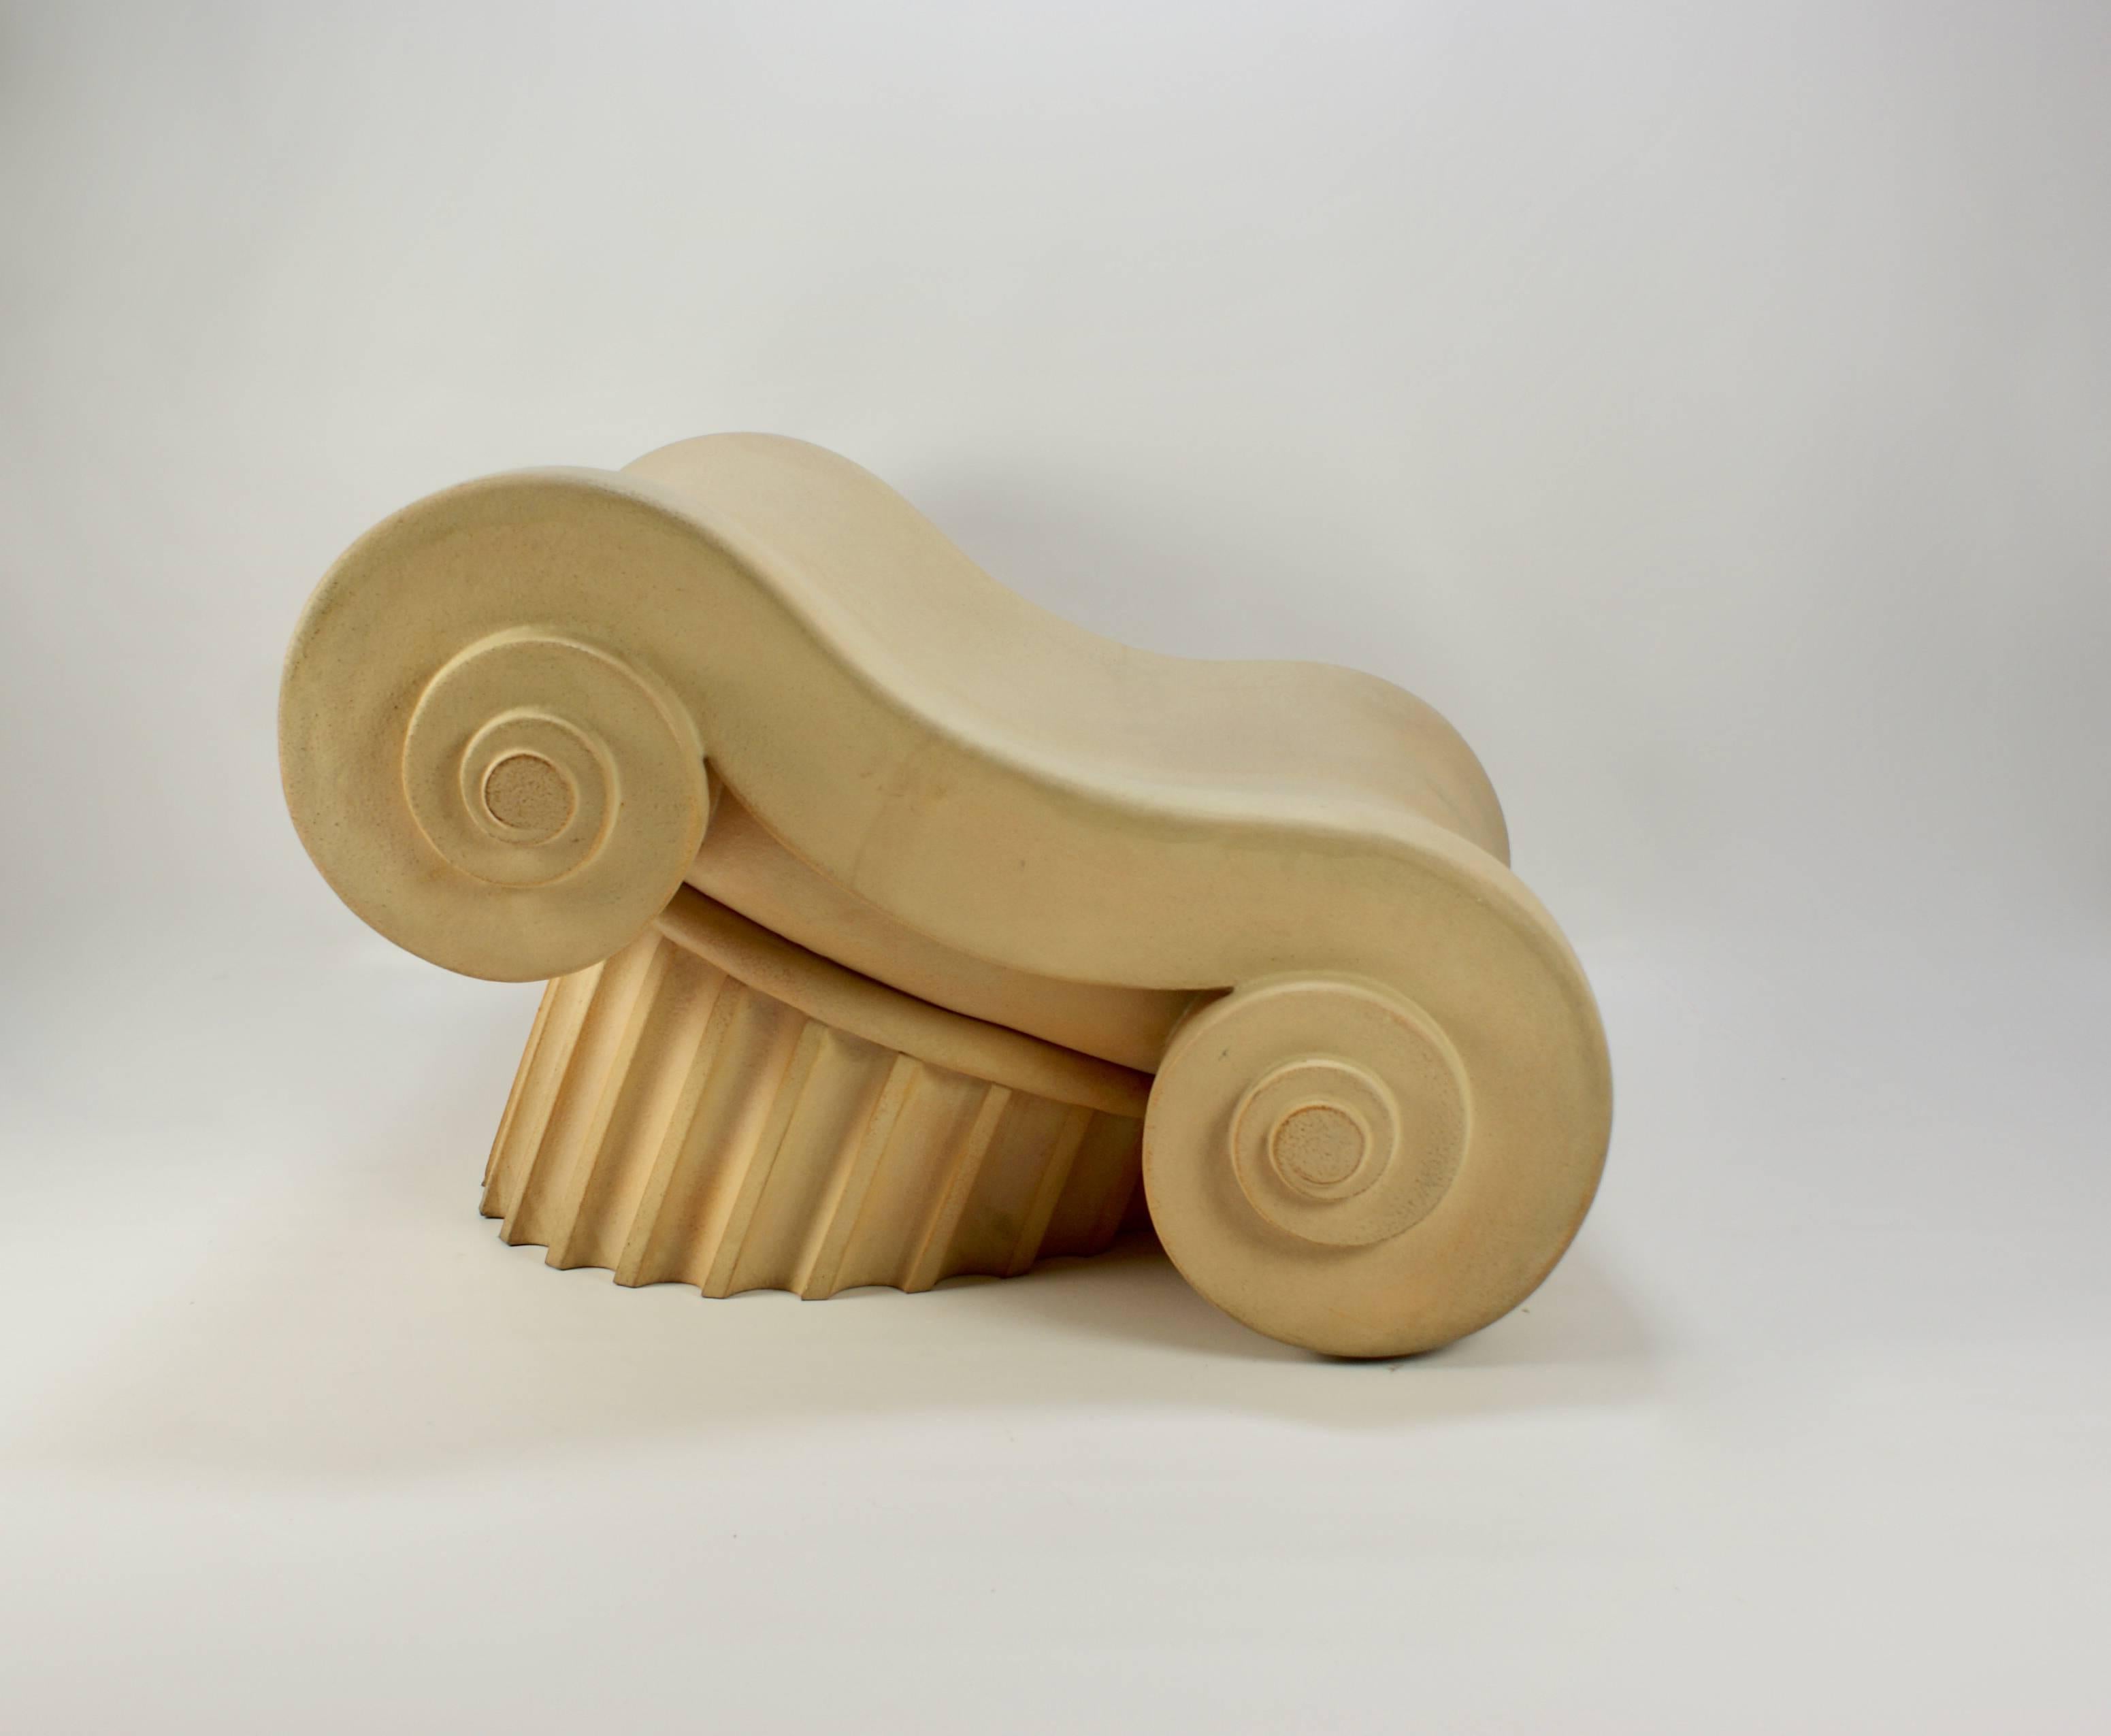 The Capitello Chair is a Pop-Art Icon and the founders of Studio 65, Franco Audrito and Piero Gatti designed it as an answer to the scepticism of the younger generation to the establishment. The Greek Ionic capital and column, a traditional Icon of